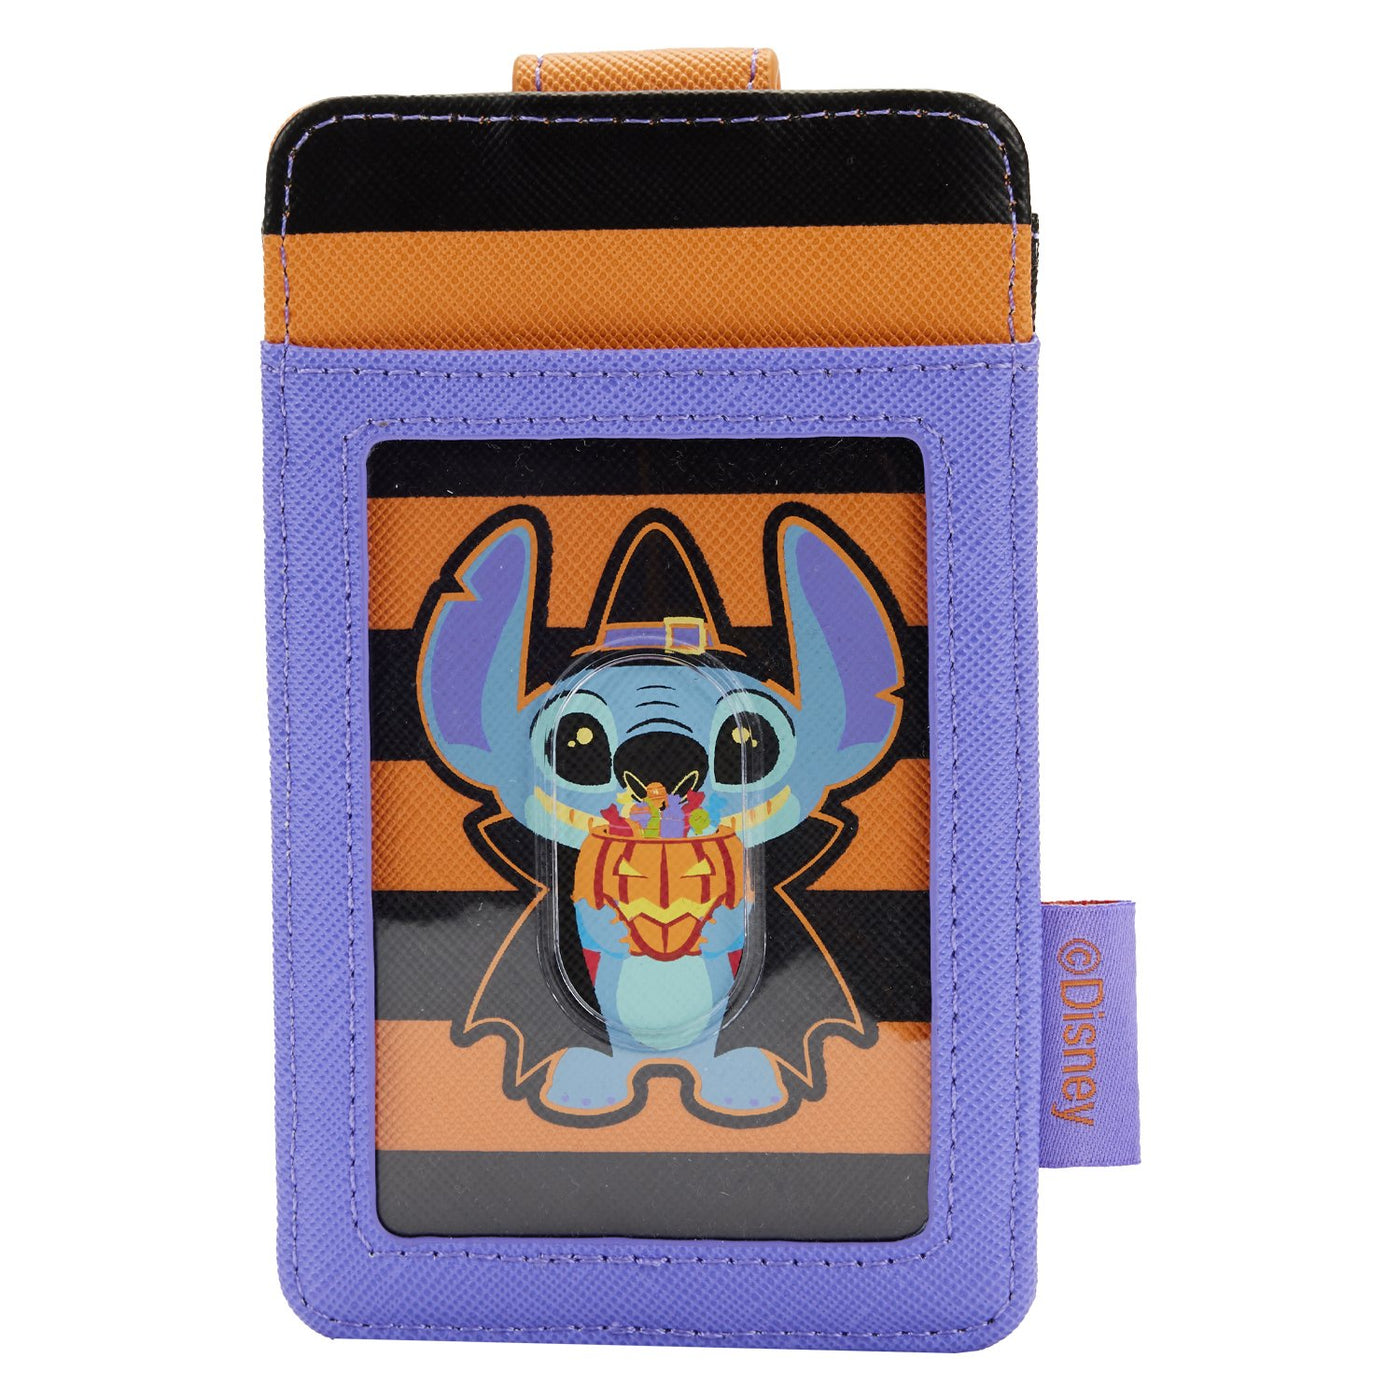 Loungefly Disney Lilo and Stitch Halloween Candy Cardholder - Back